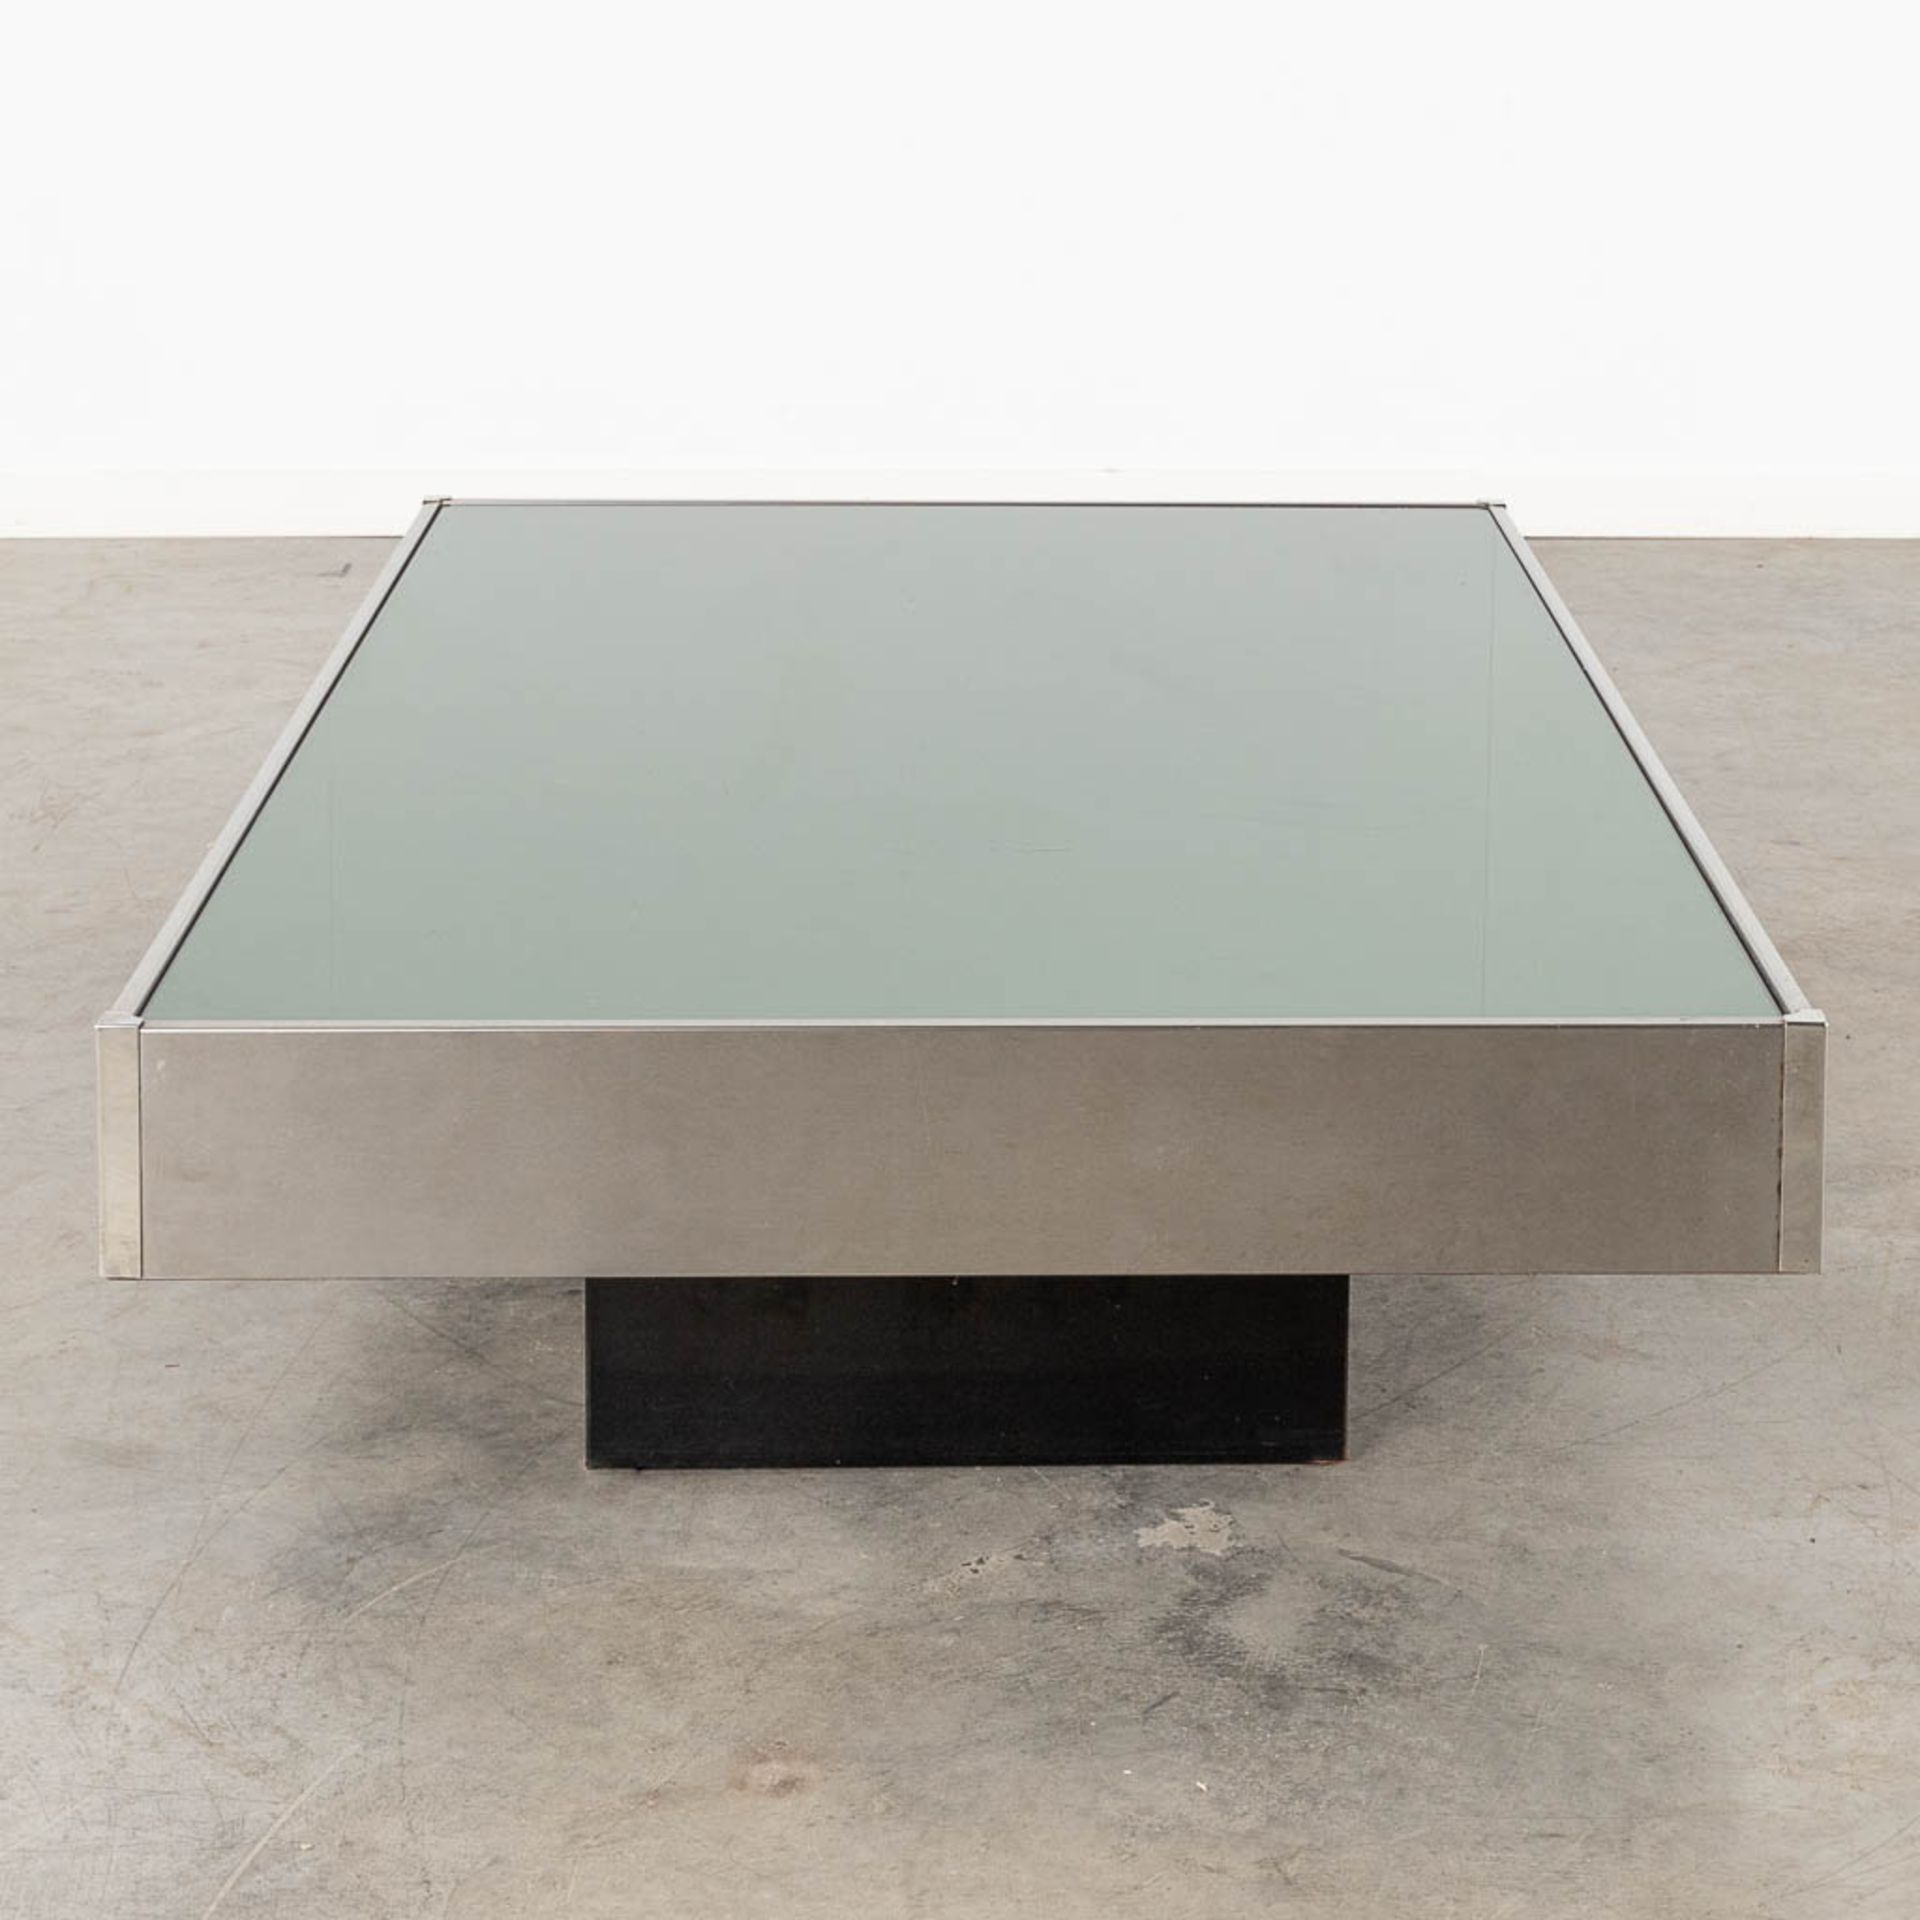 A coffee table, tinted glass and chrome, in the style of Willy Rizzo. (L:80 x W:120 x H:31 cm) - Image 4 of 10